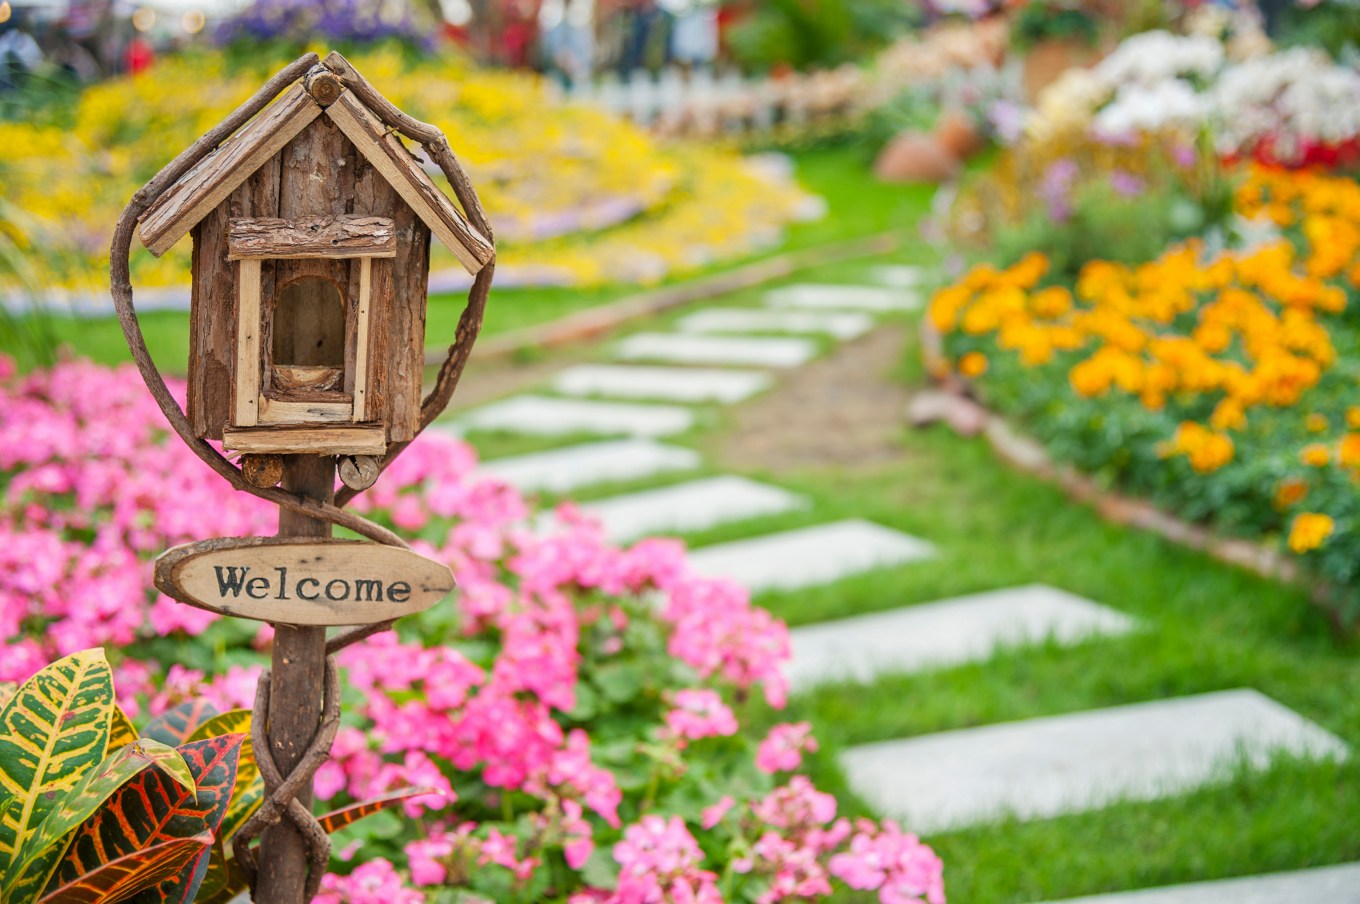 welcome yard sign on a small birdhouse in colorful landscaped garden in maintained yard of a home